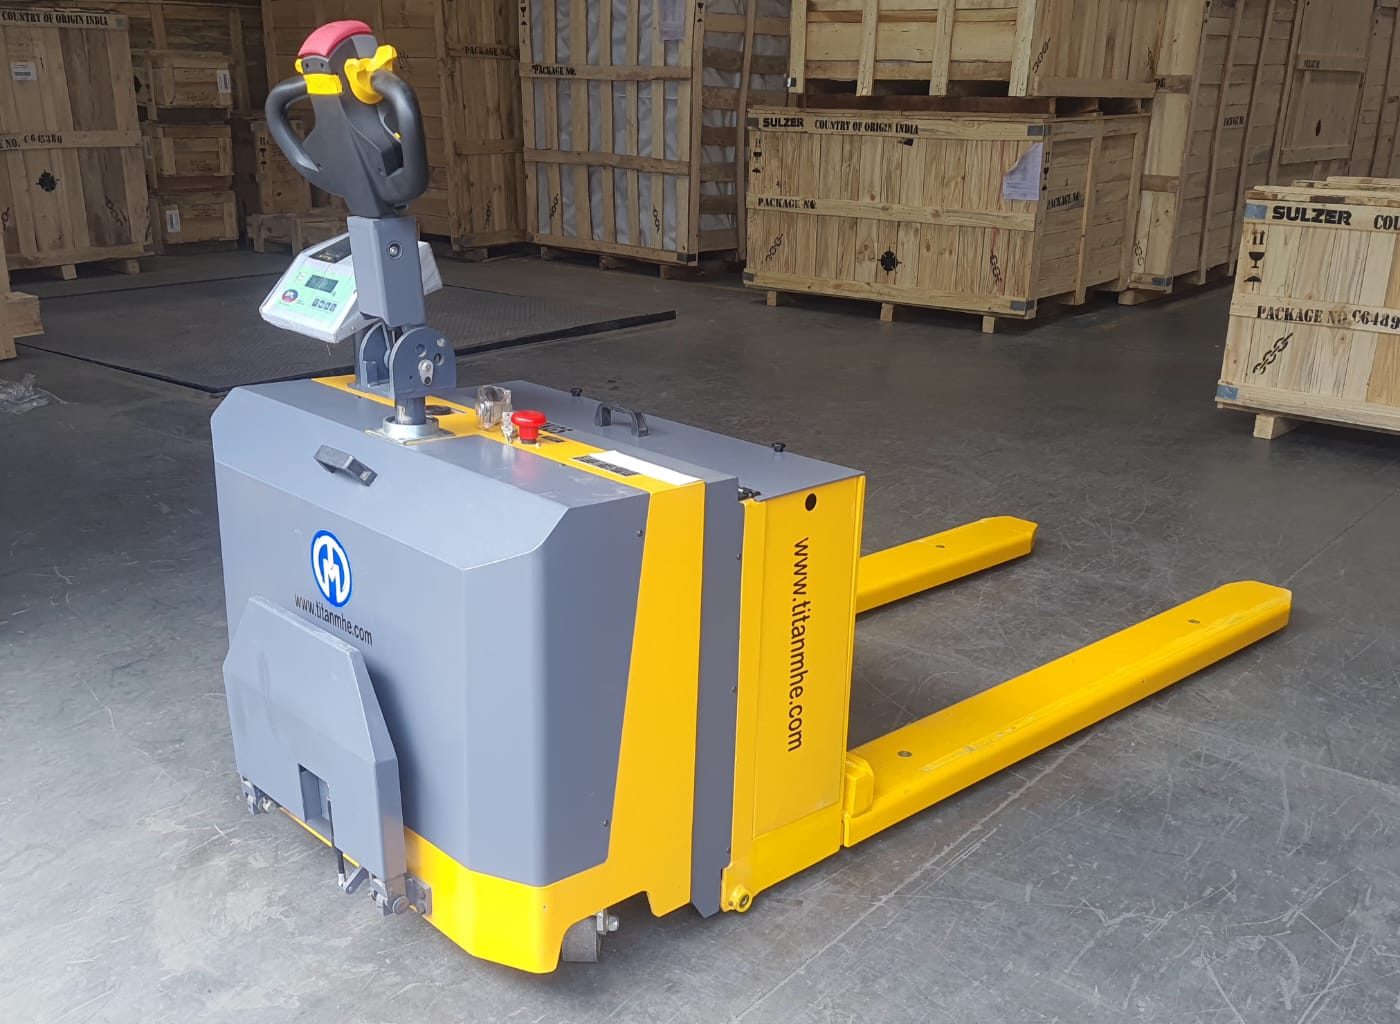 Battery Operated Pallet Truck Manufacturers, Suppliers in Tamil Nadu, Coimbatore, Chennai 